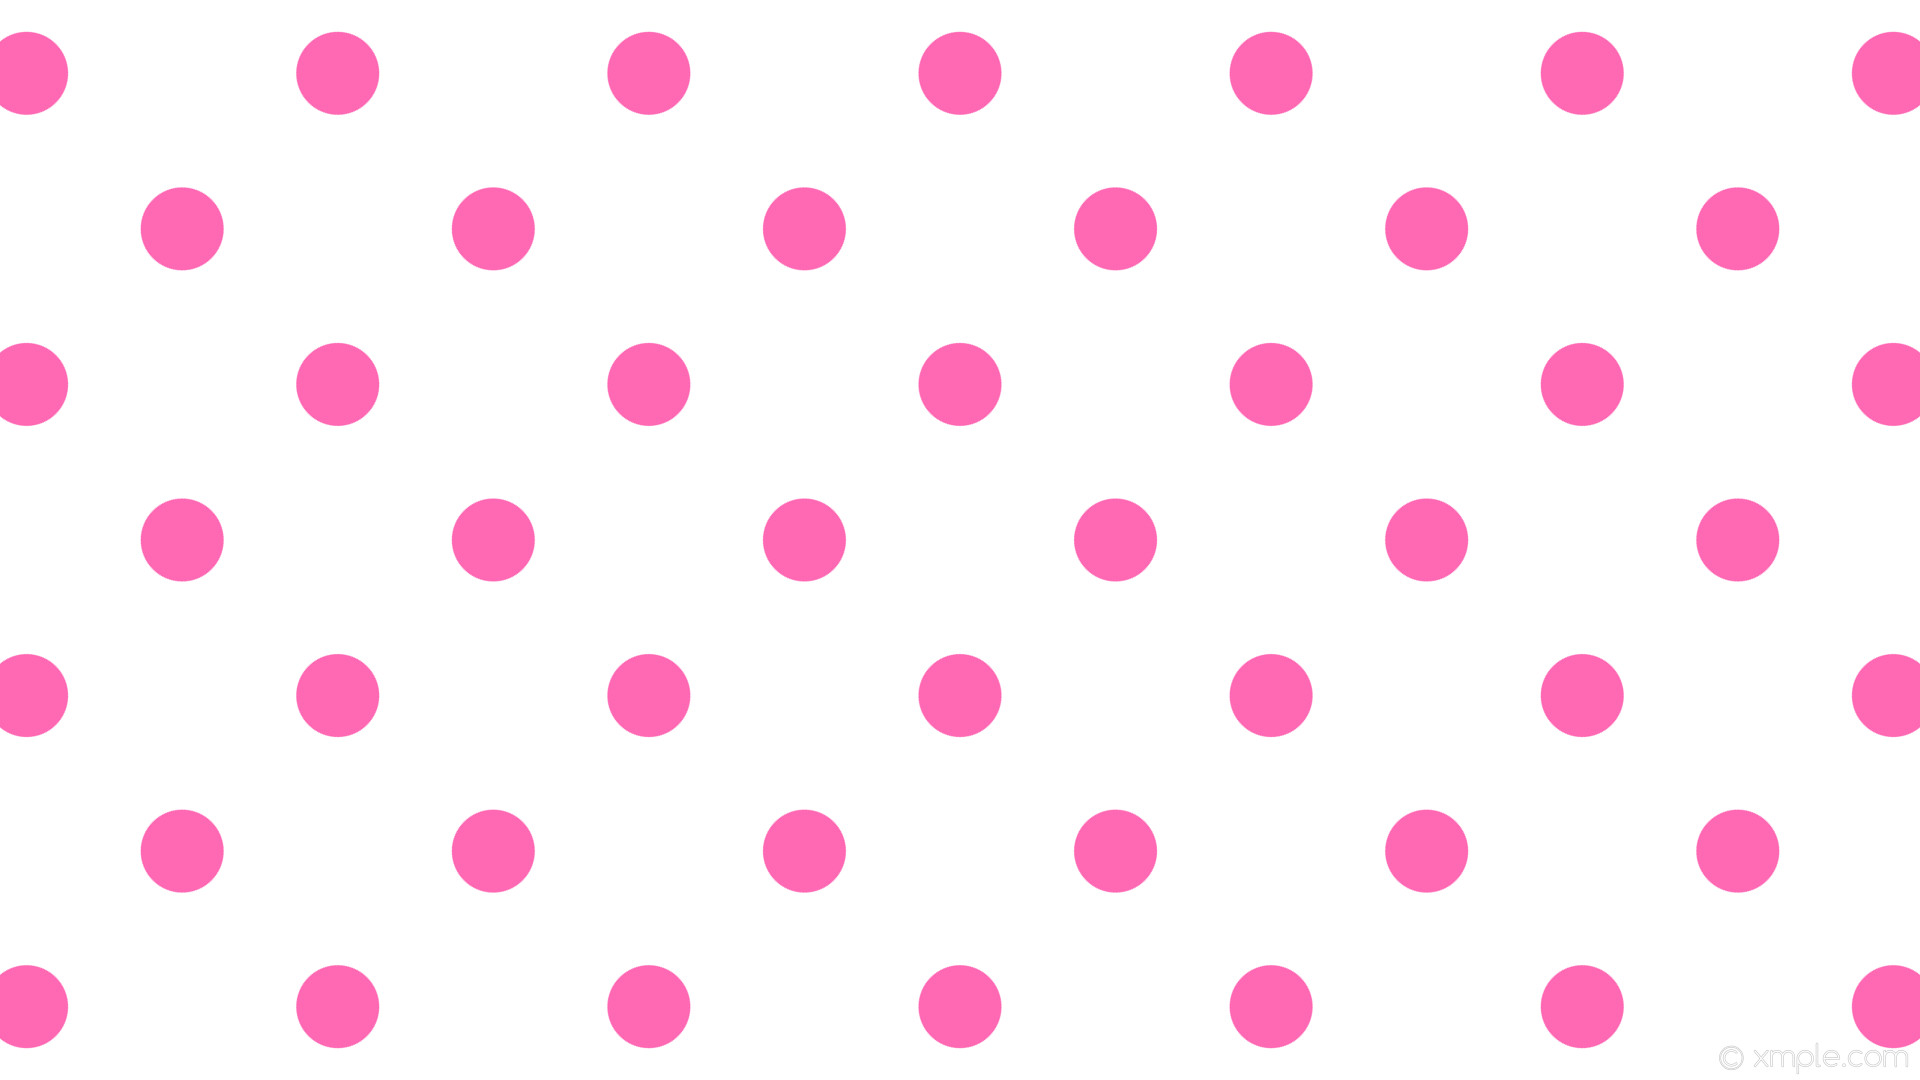 Polka Dots Pink And White Wallpaper Image Gallery – HCPR. Polka Dots Pink  And White Wallpaper Image Gallery HCPR